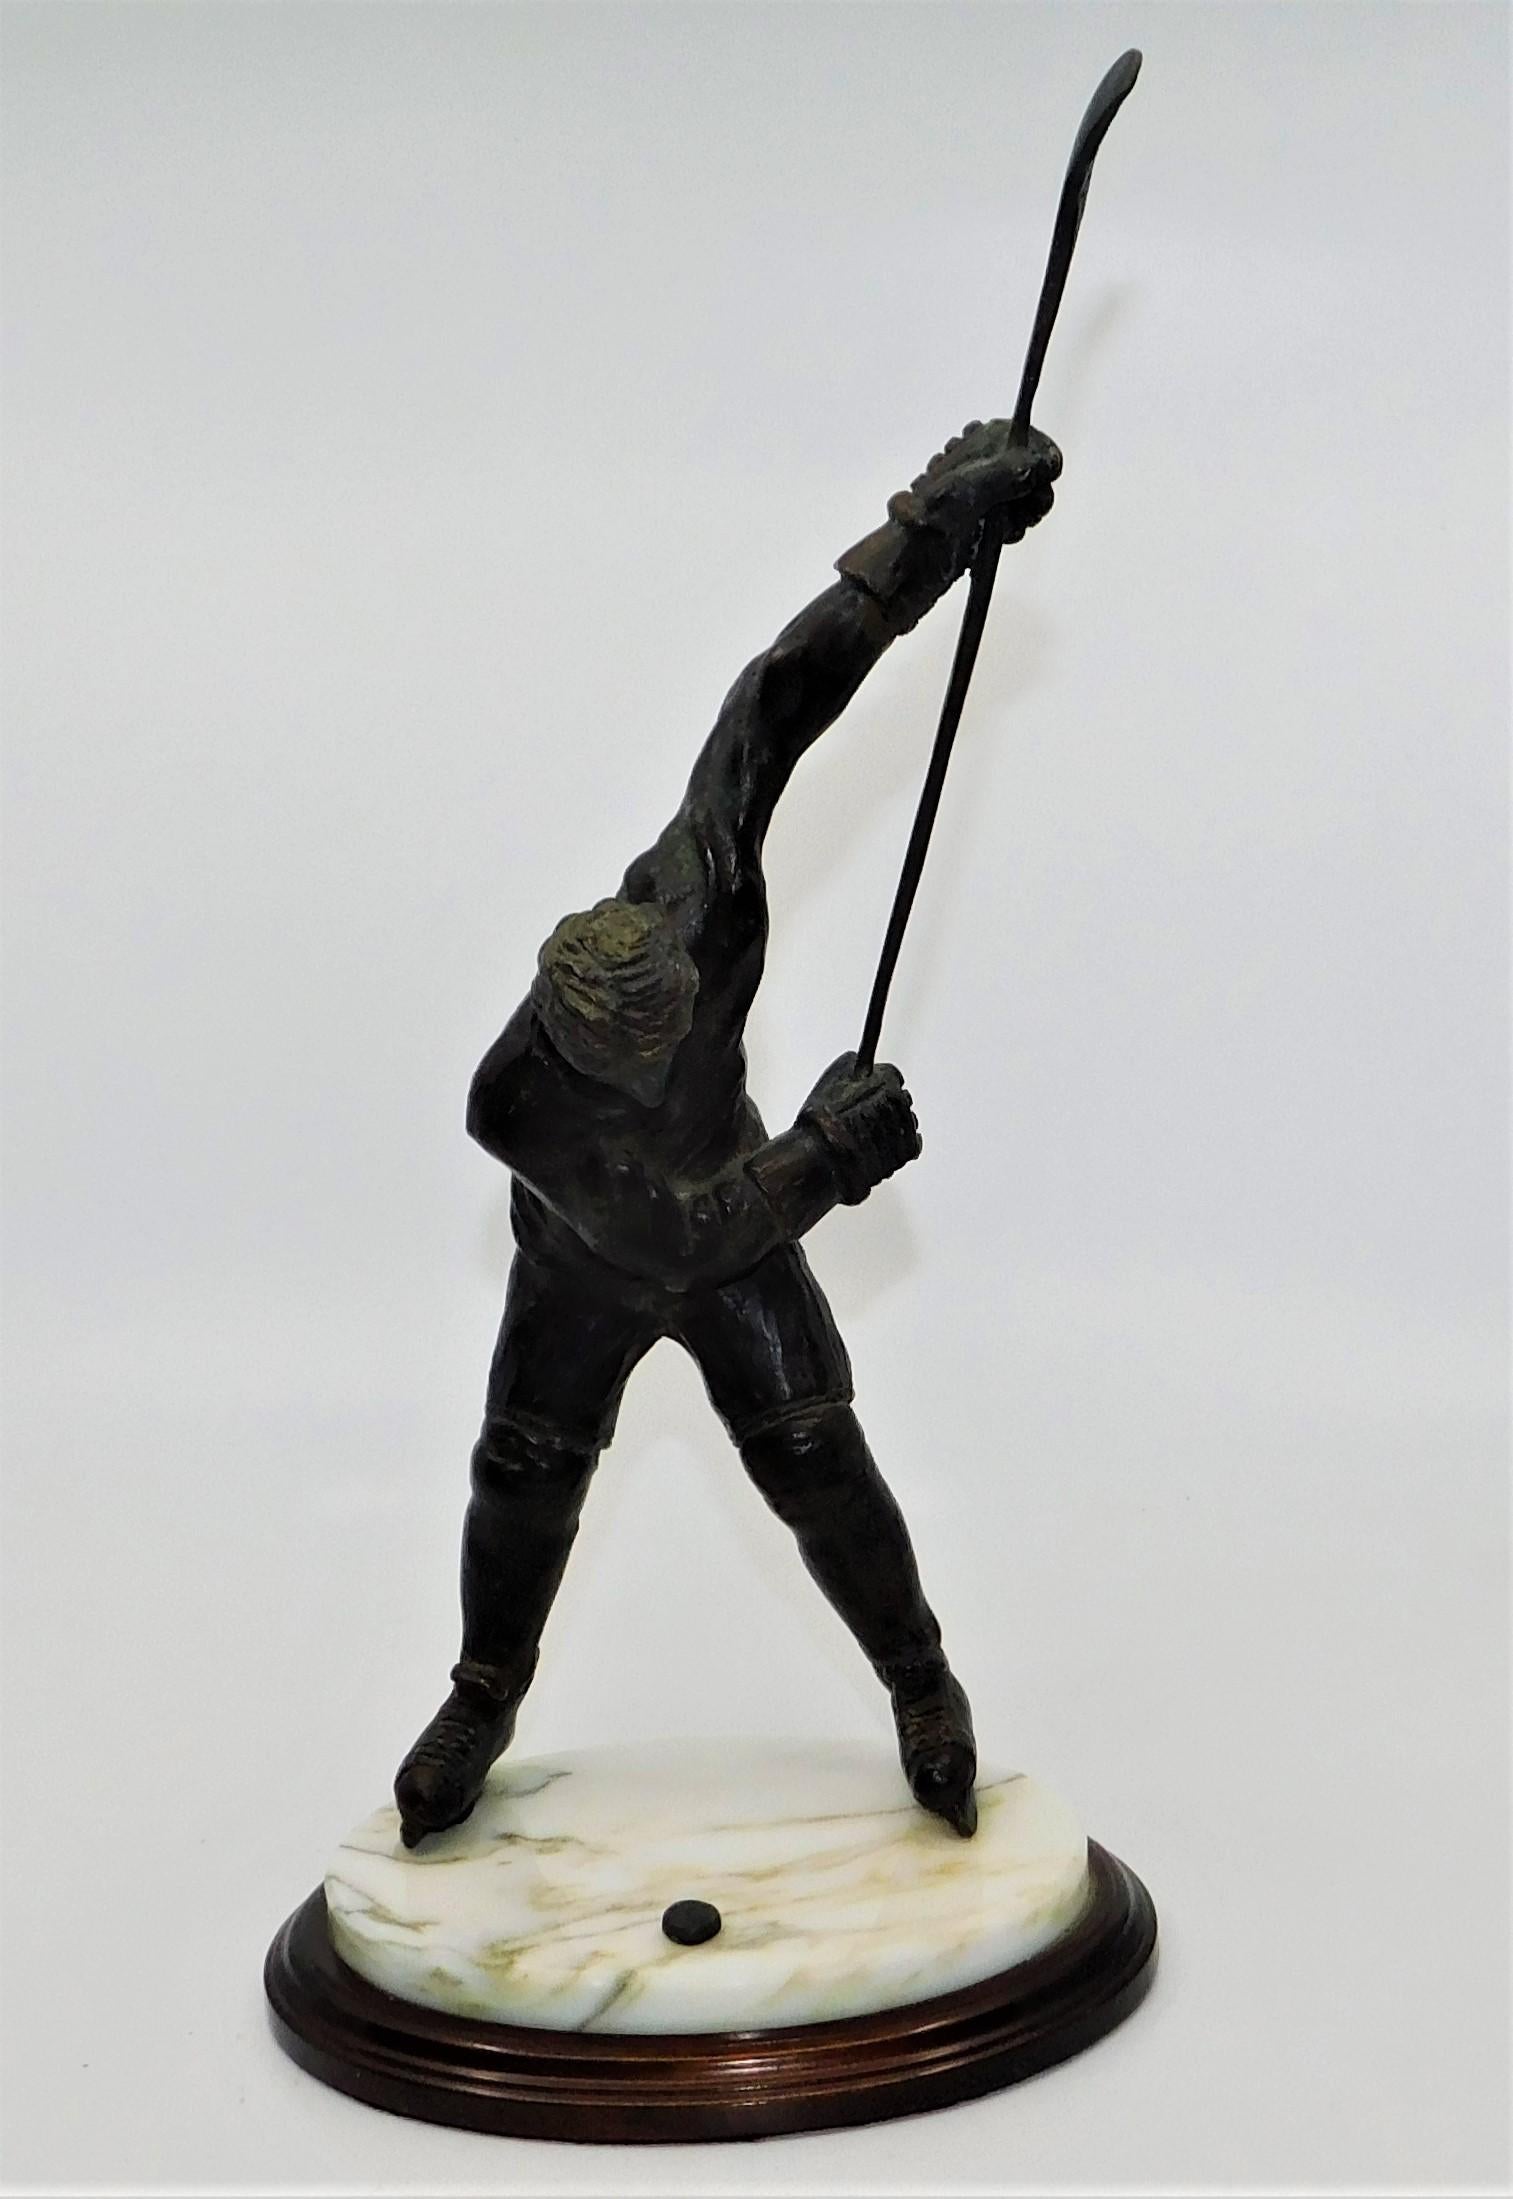 Wayne Gretzky 1985 Limited-Edition Hand Sculpted Bronze Statue #20/200 9